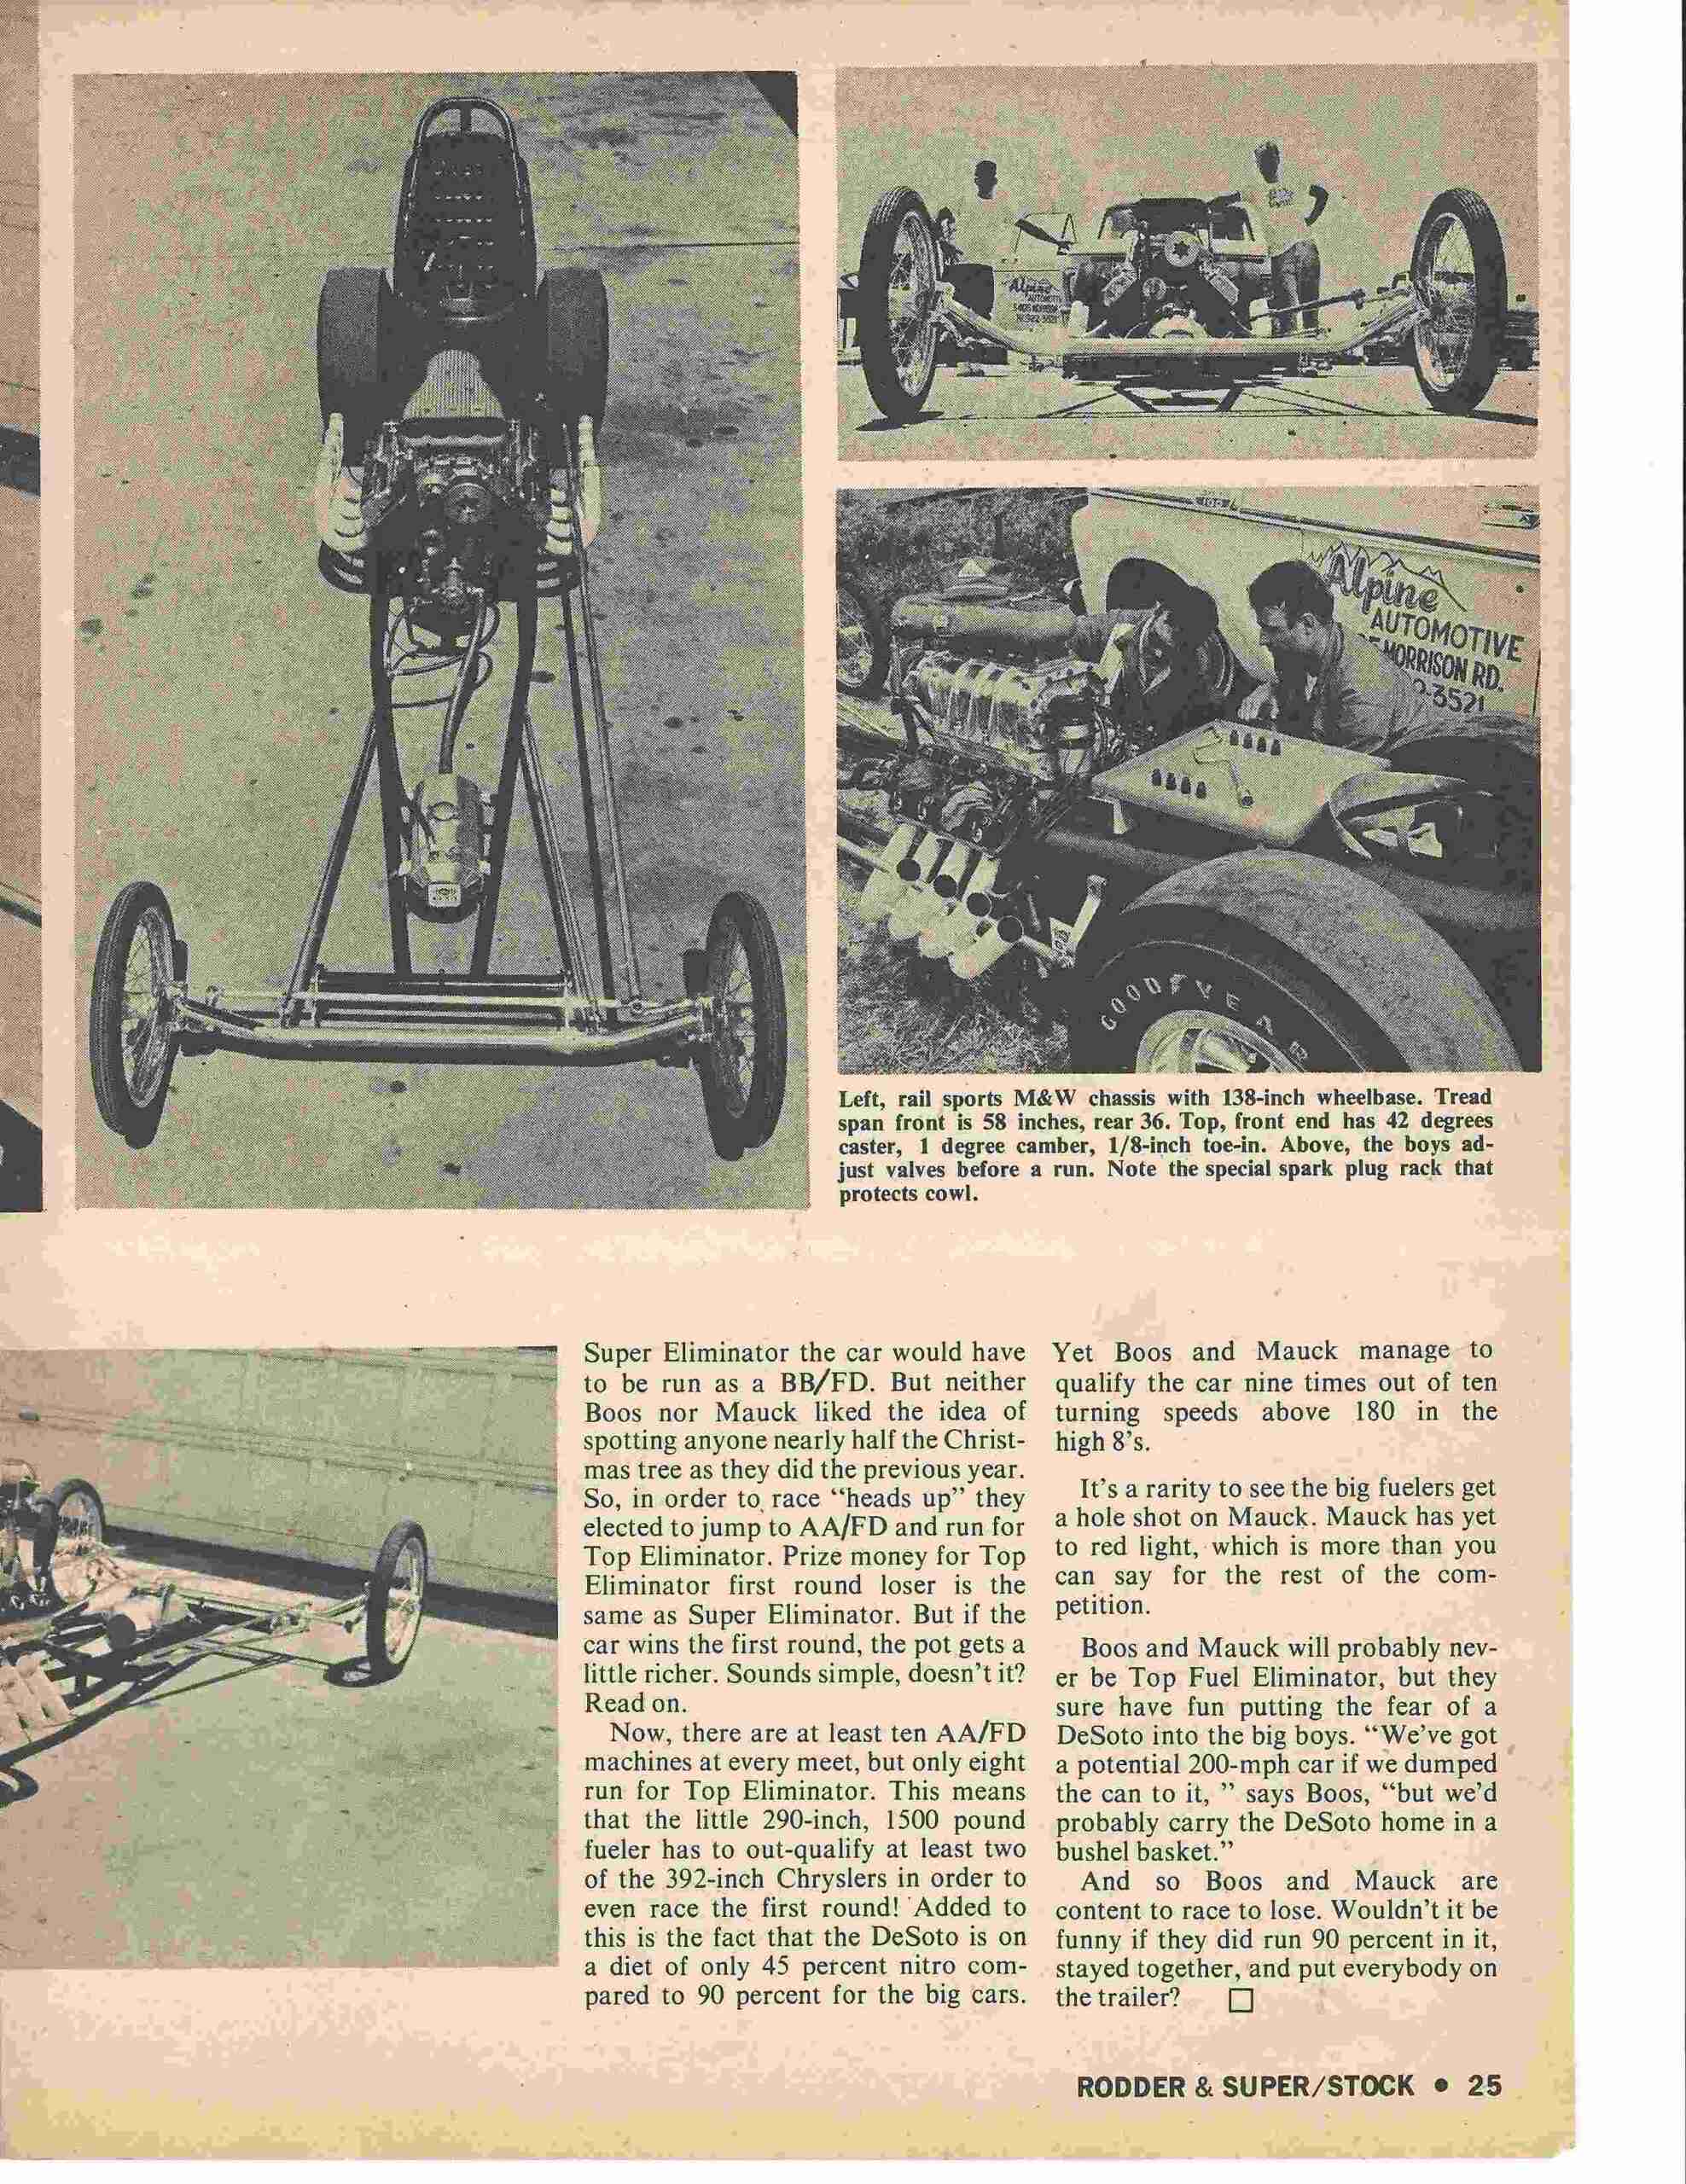 A picture from a vintage car racing magazine